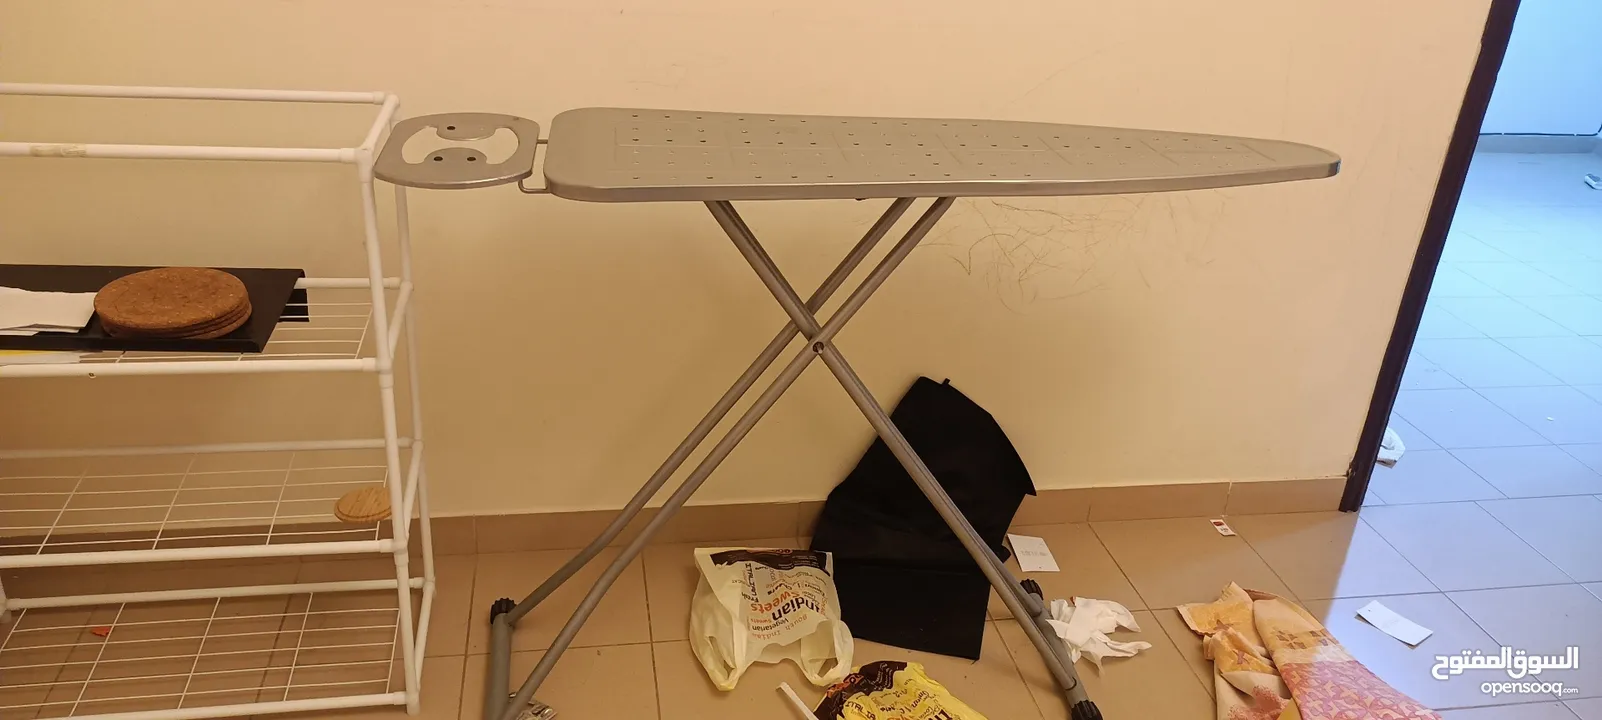 dressing table iron stand new bicycle